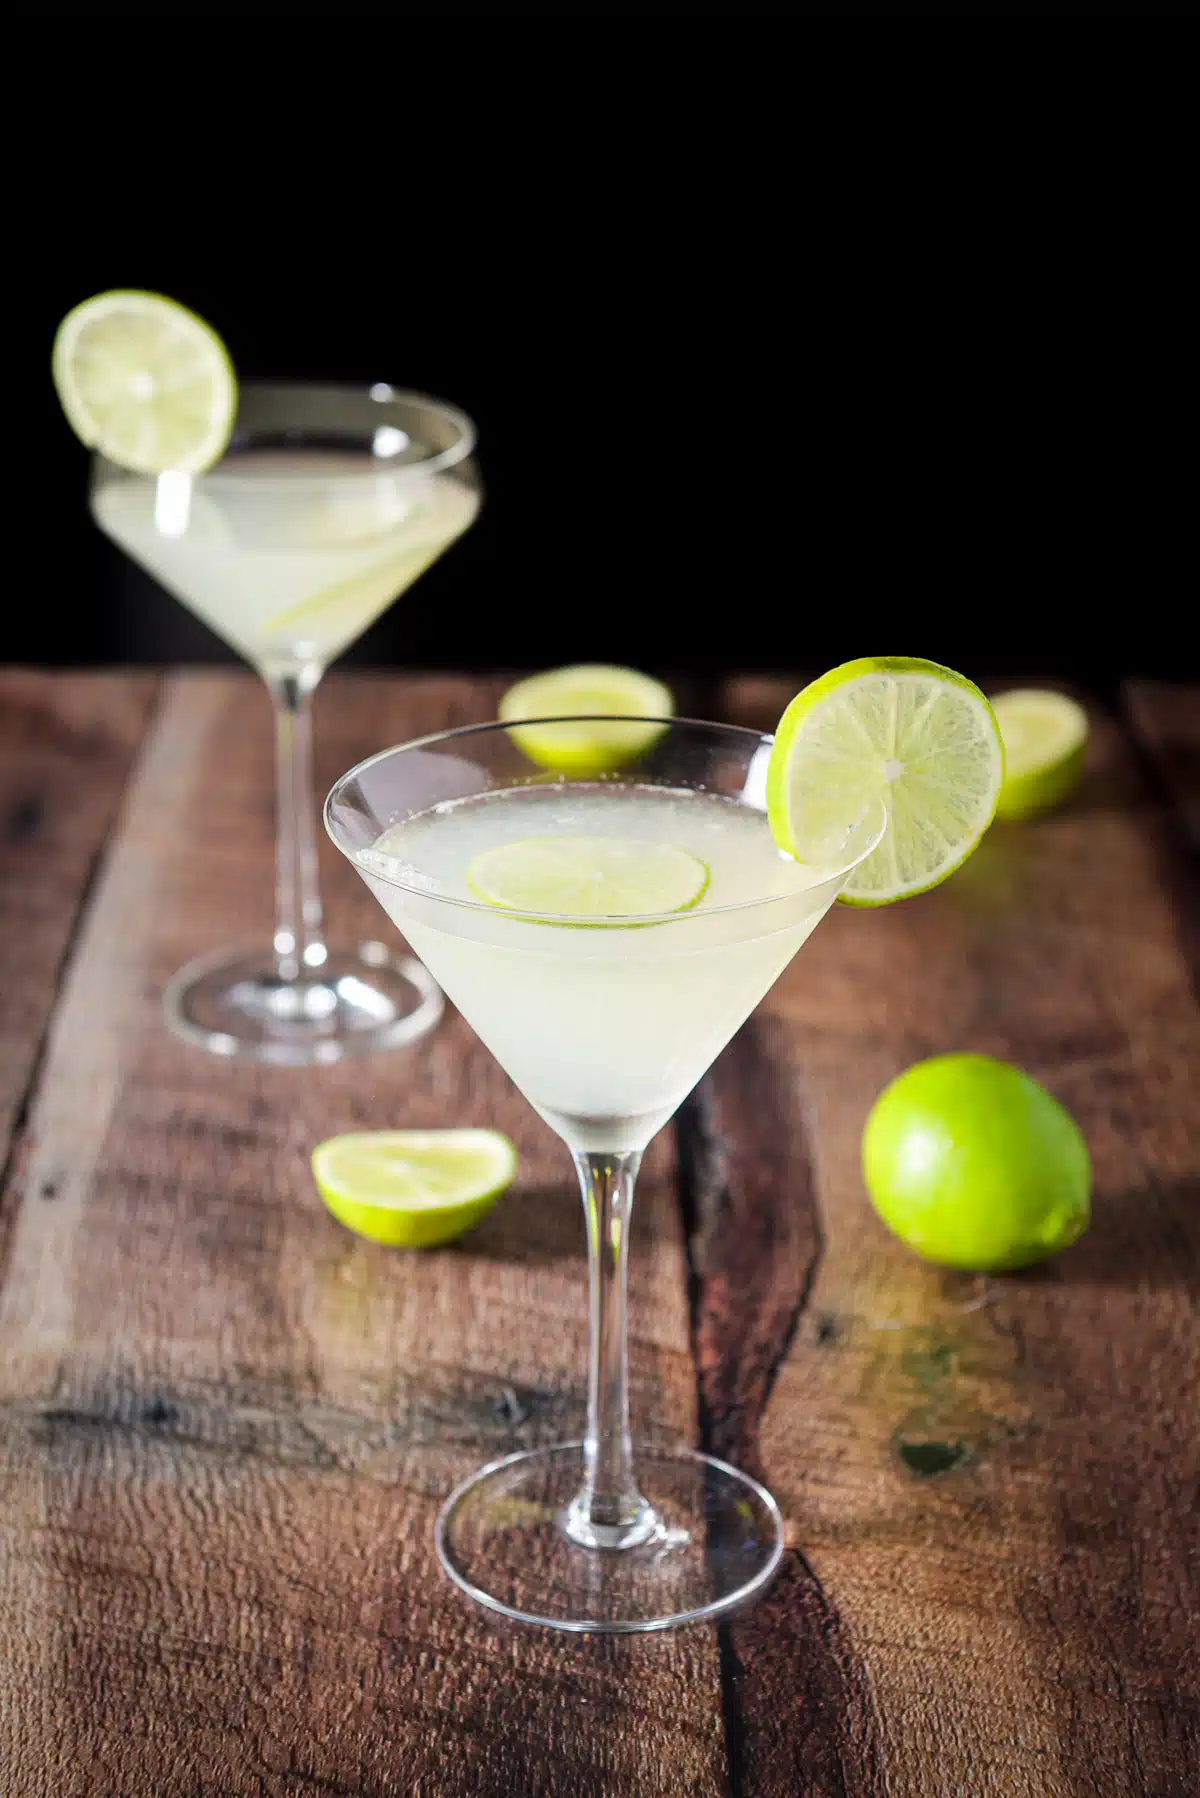 A beveled regular martini glass with another fun glass filled with the martini and garnished with lime wheels